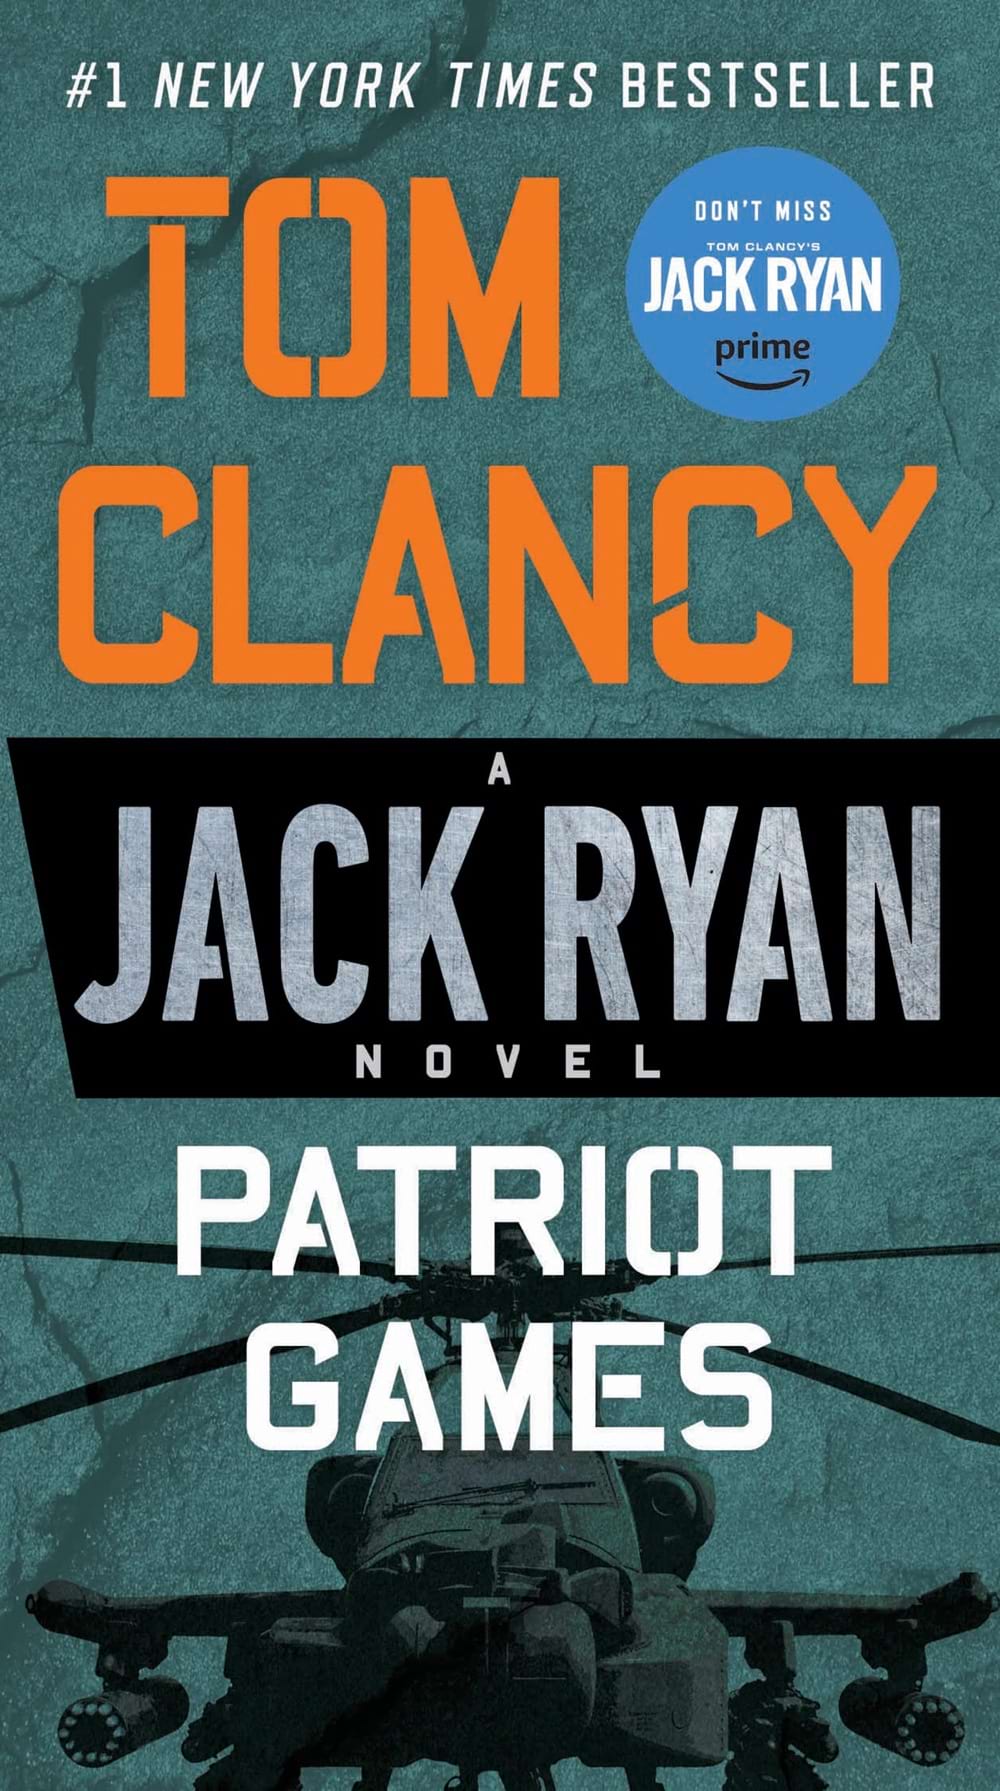 The cover of Patriot Games